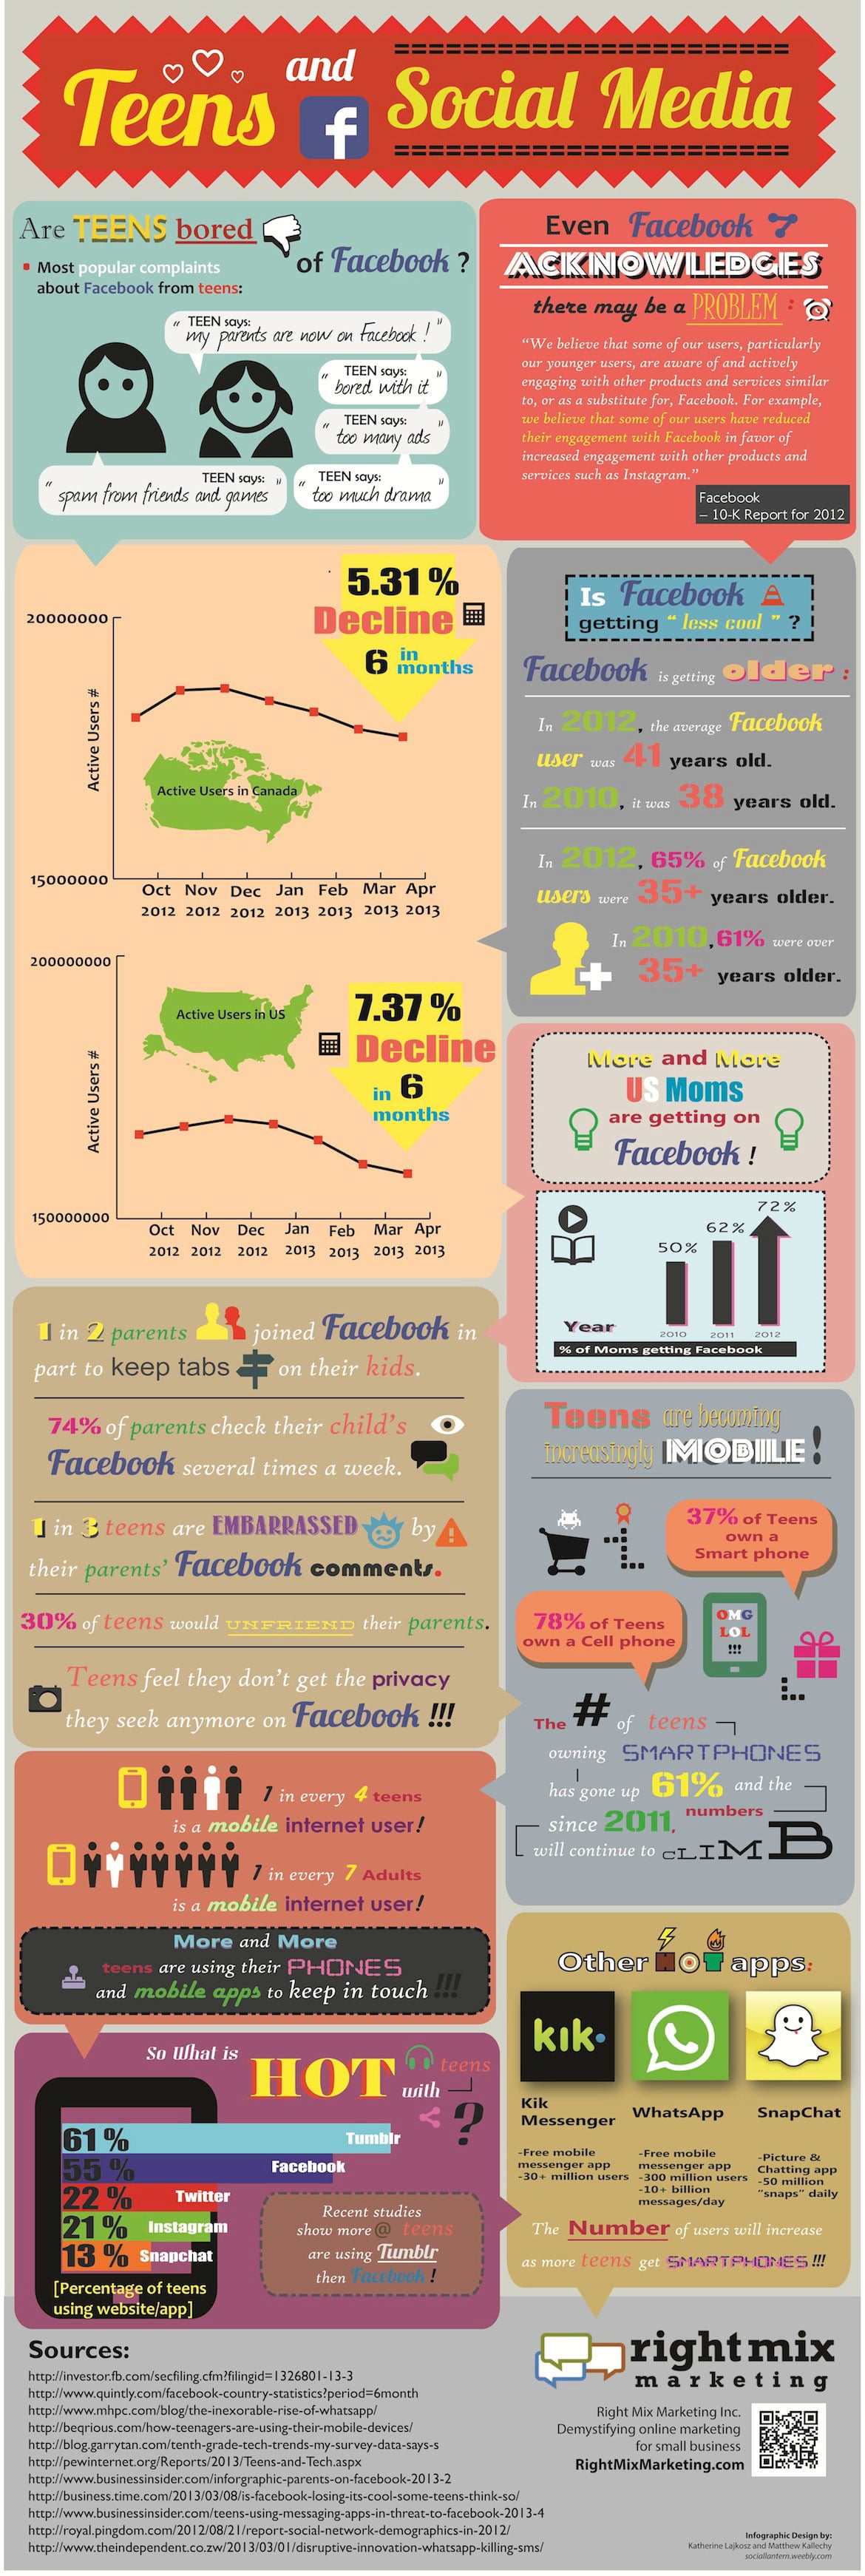 teenagers-and-facebook-infographic